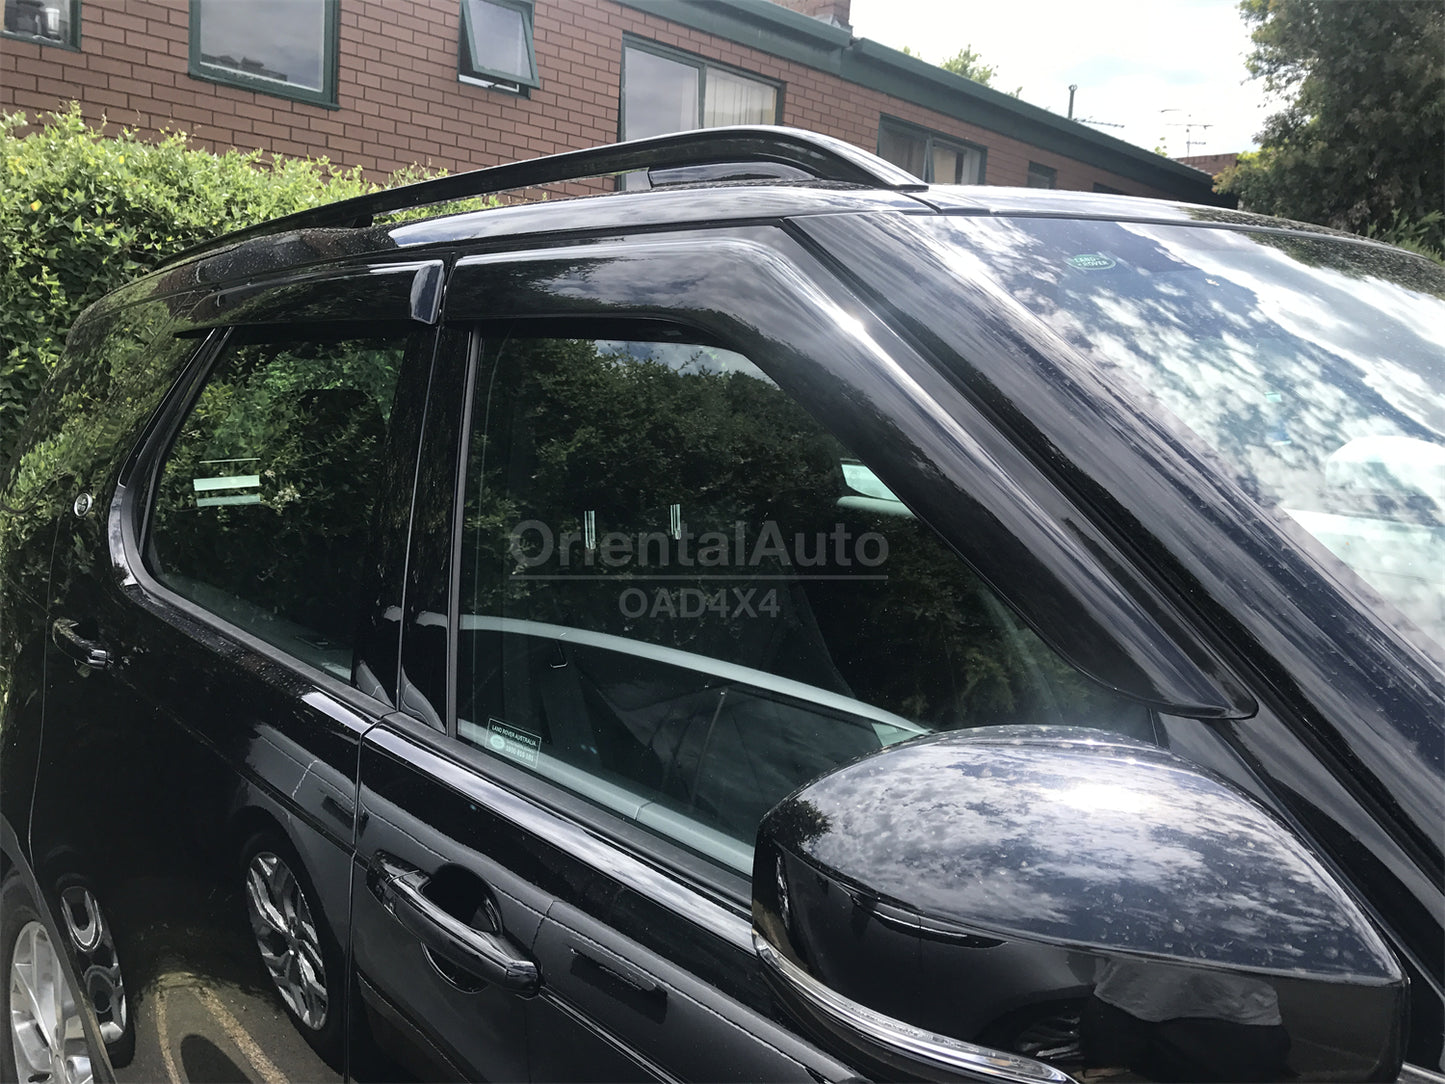 Premium Weathershields For Land Rover Discovery 5 Series 2017-onwards Weather Shields Window Visor